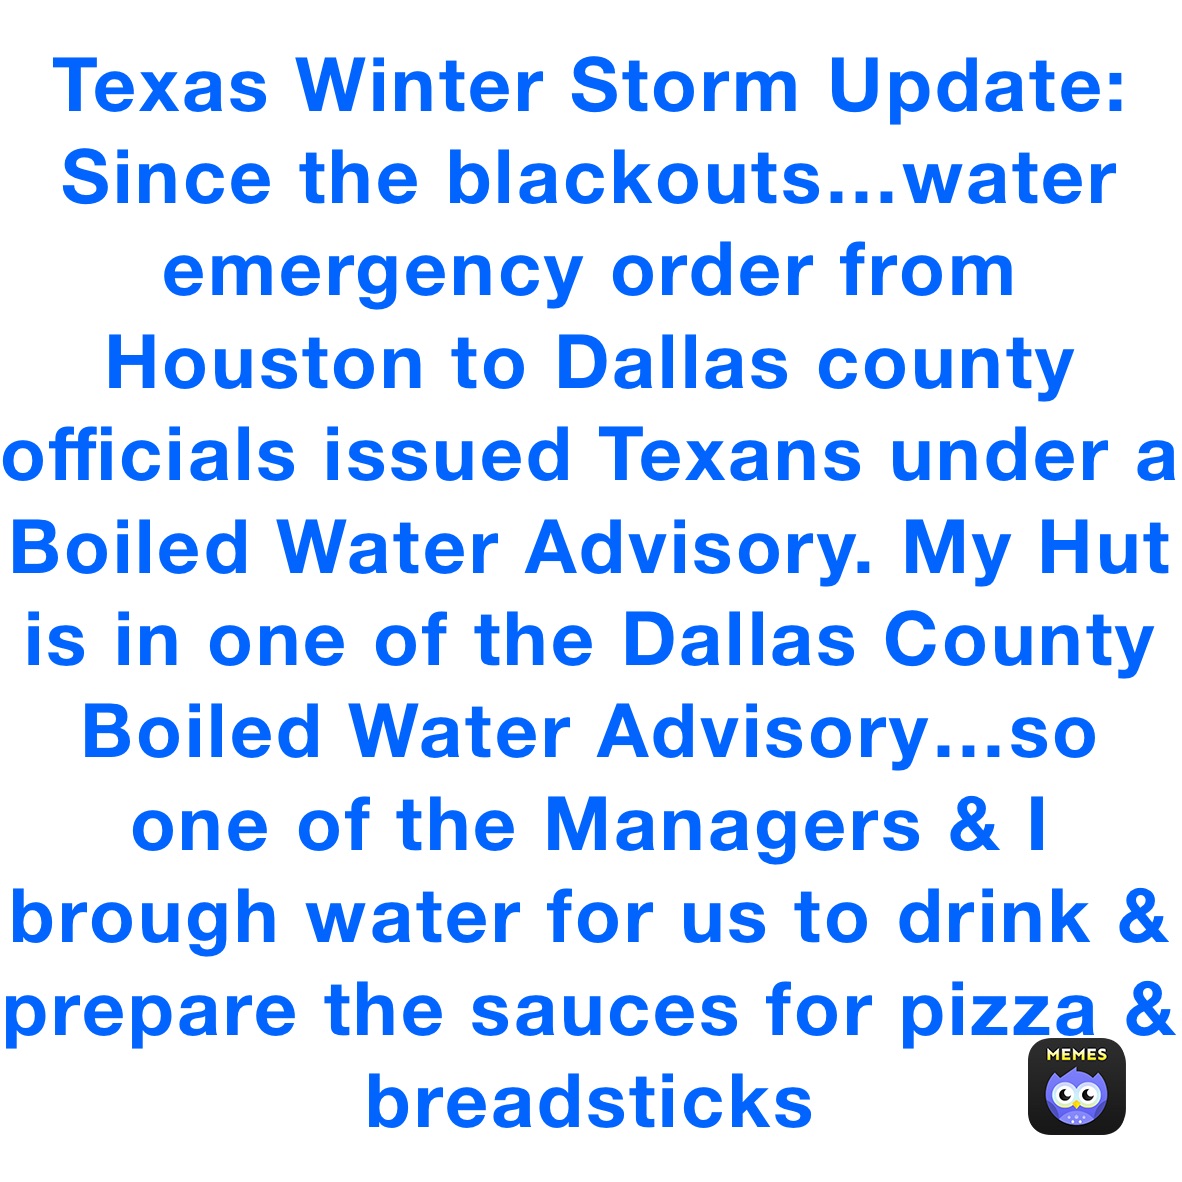 Texas Winter Storm Update: Since the blackouts…water emergency order from Houston to Dallas county officials issued Texans under a Boiled Water Advisory. My Hut is in one of the Dallas County Boiled Water Advisory…so one of the Managers & I brough water for us to drink & prepare the sauces for pizza & breadsticks